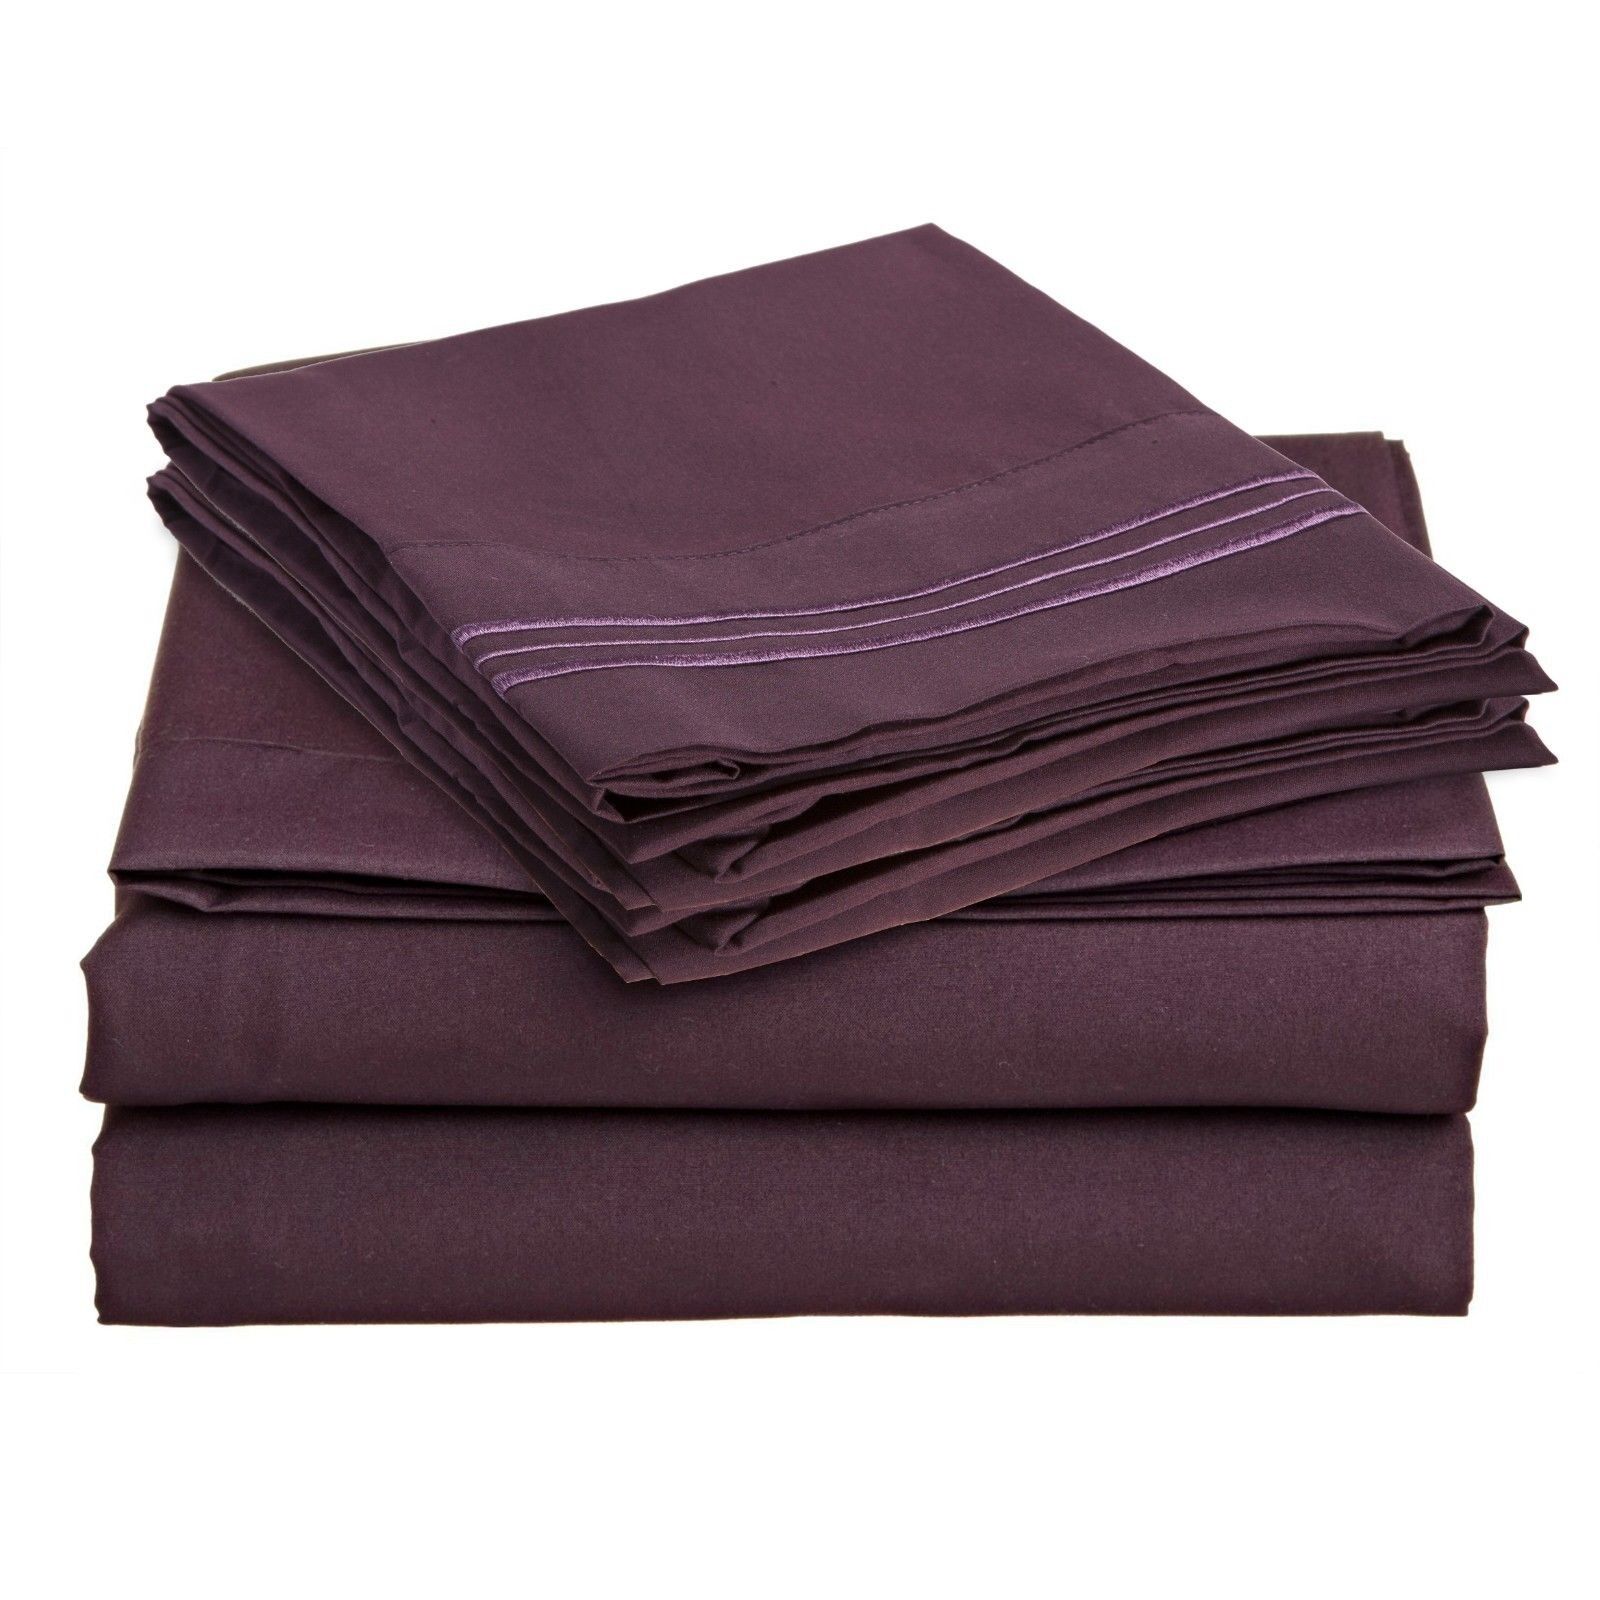 Bed Sheets - Deep Pocket Bed Sheets- 4 Piece Set, Queen, King, Twin, or Full Size - King / Purple Eggplant